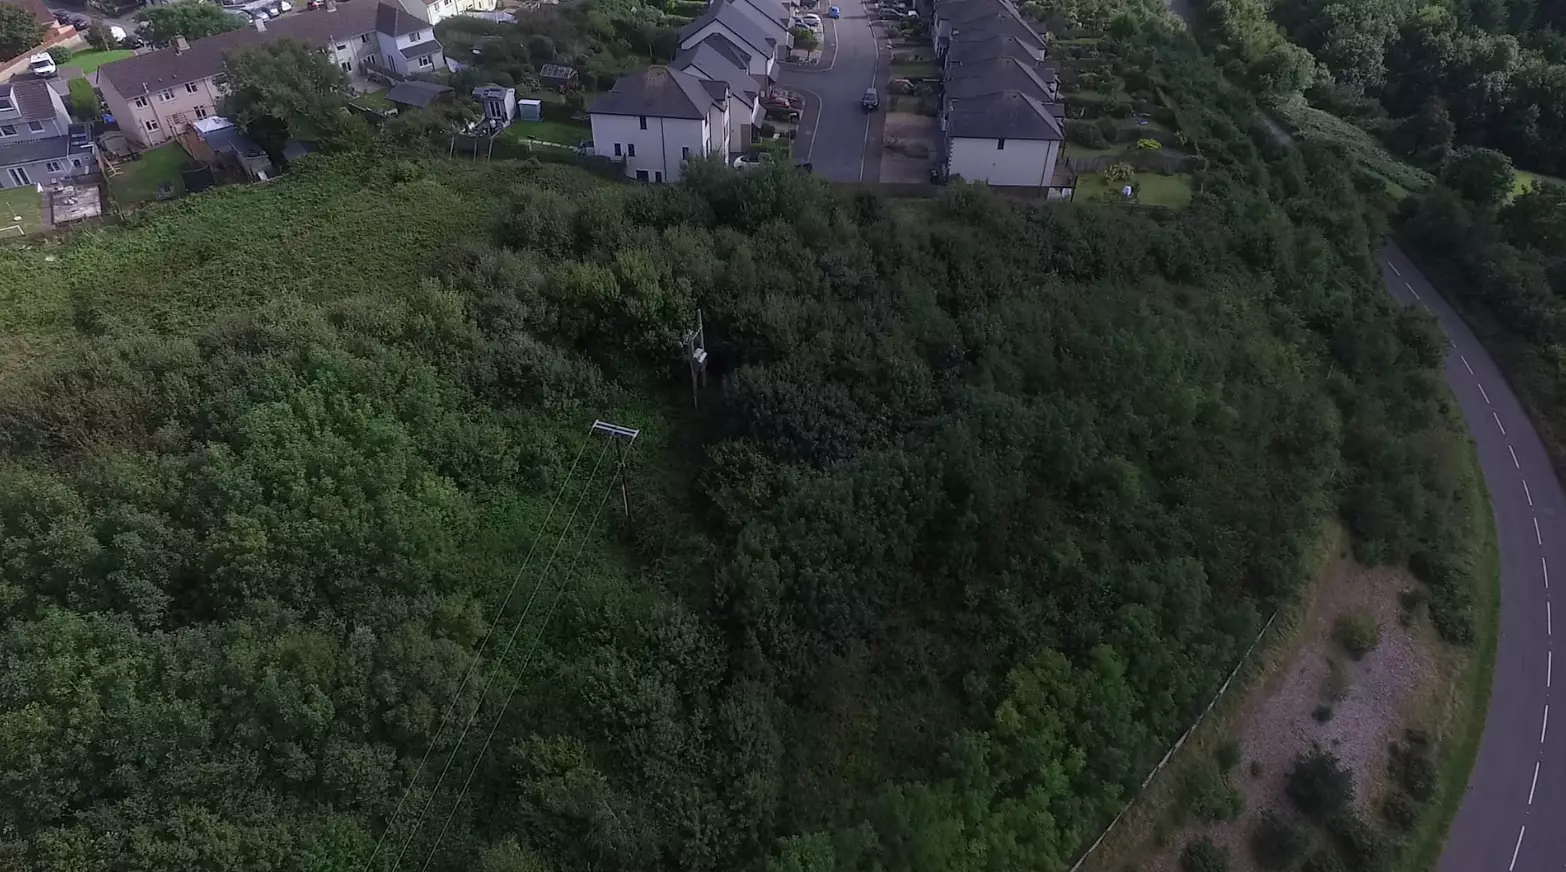 Residents have said they used to enjoy the woodland area, which several houses backed onto.